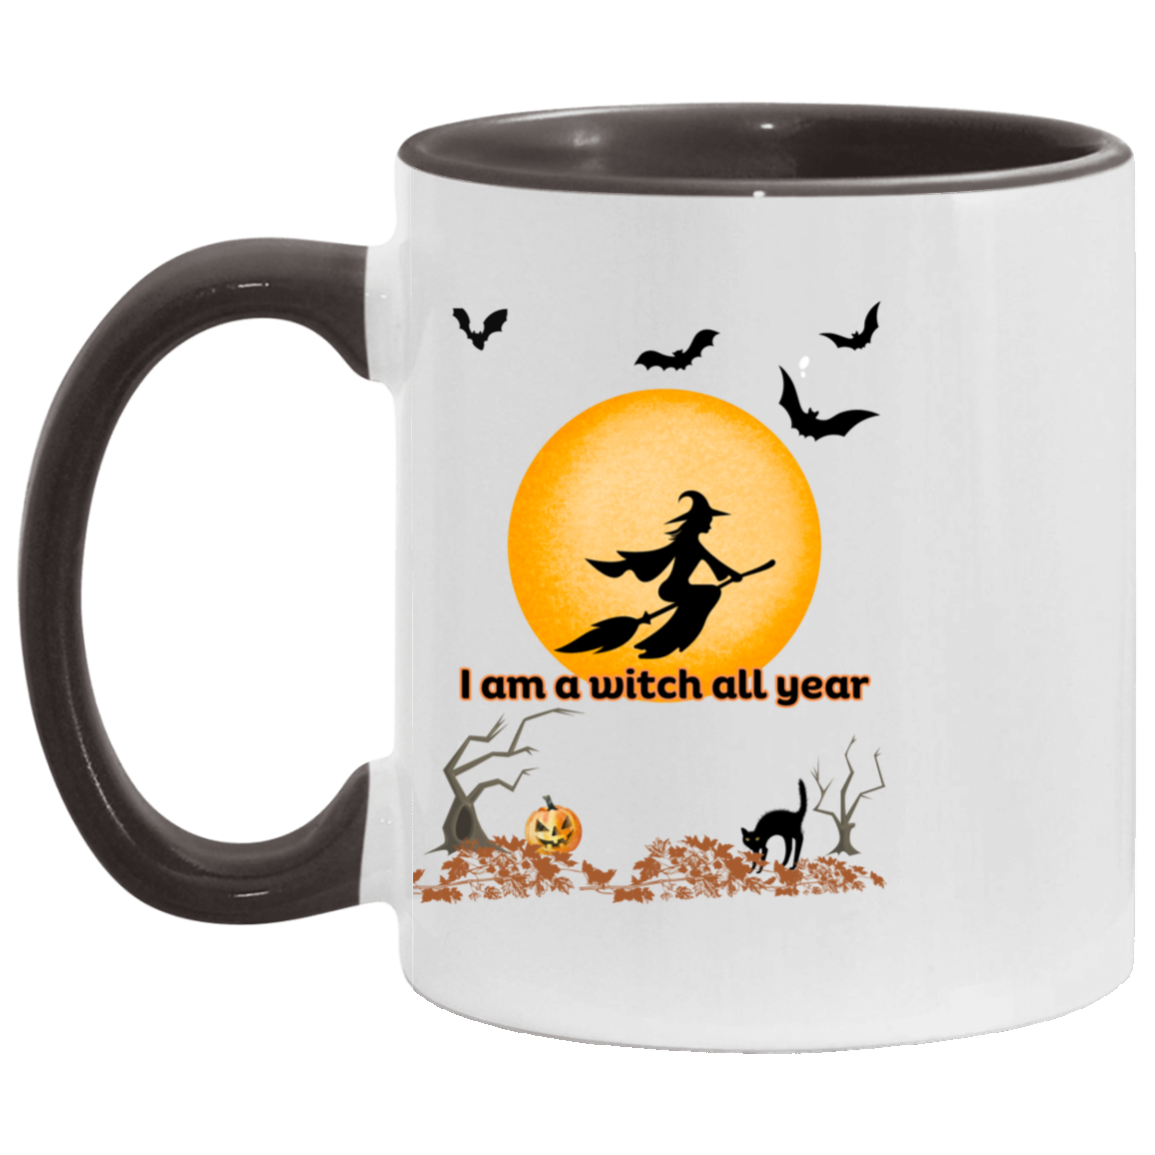 Get trendy with I am a Witch all Year 11 oz. Accent Mug - Drinkware available at Good Gift Company. Grab yours for $16.95 today!